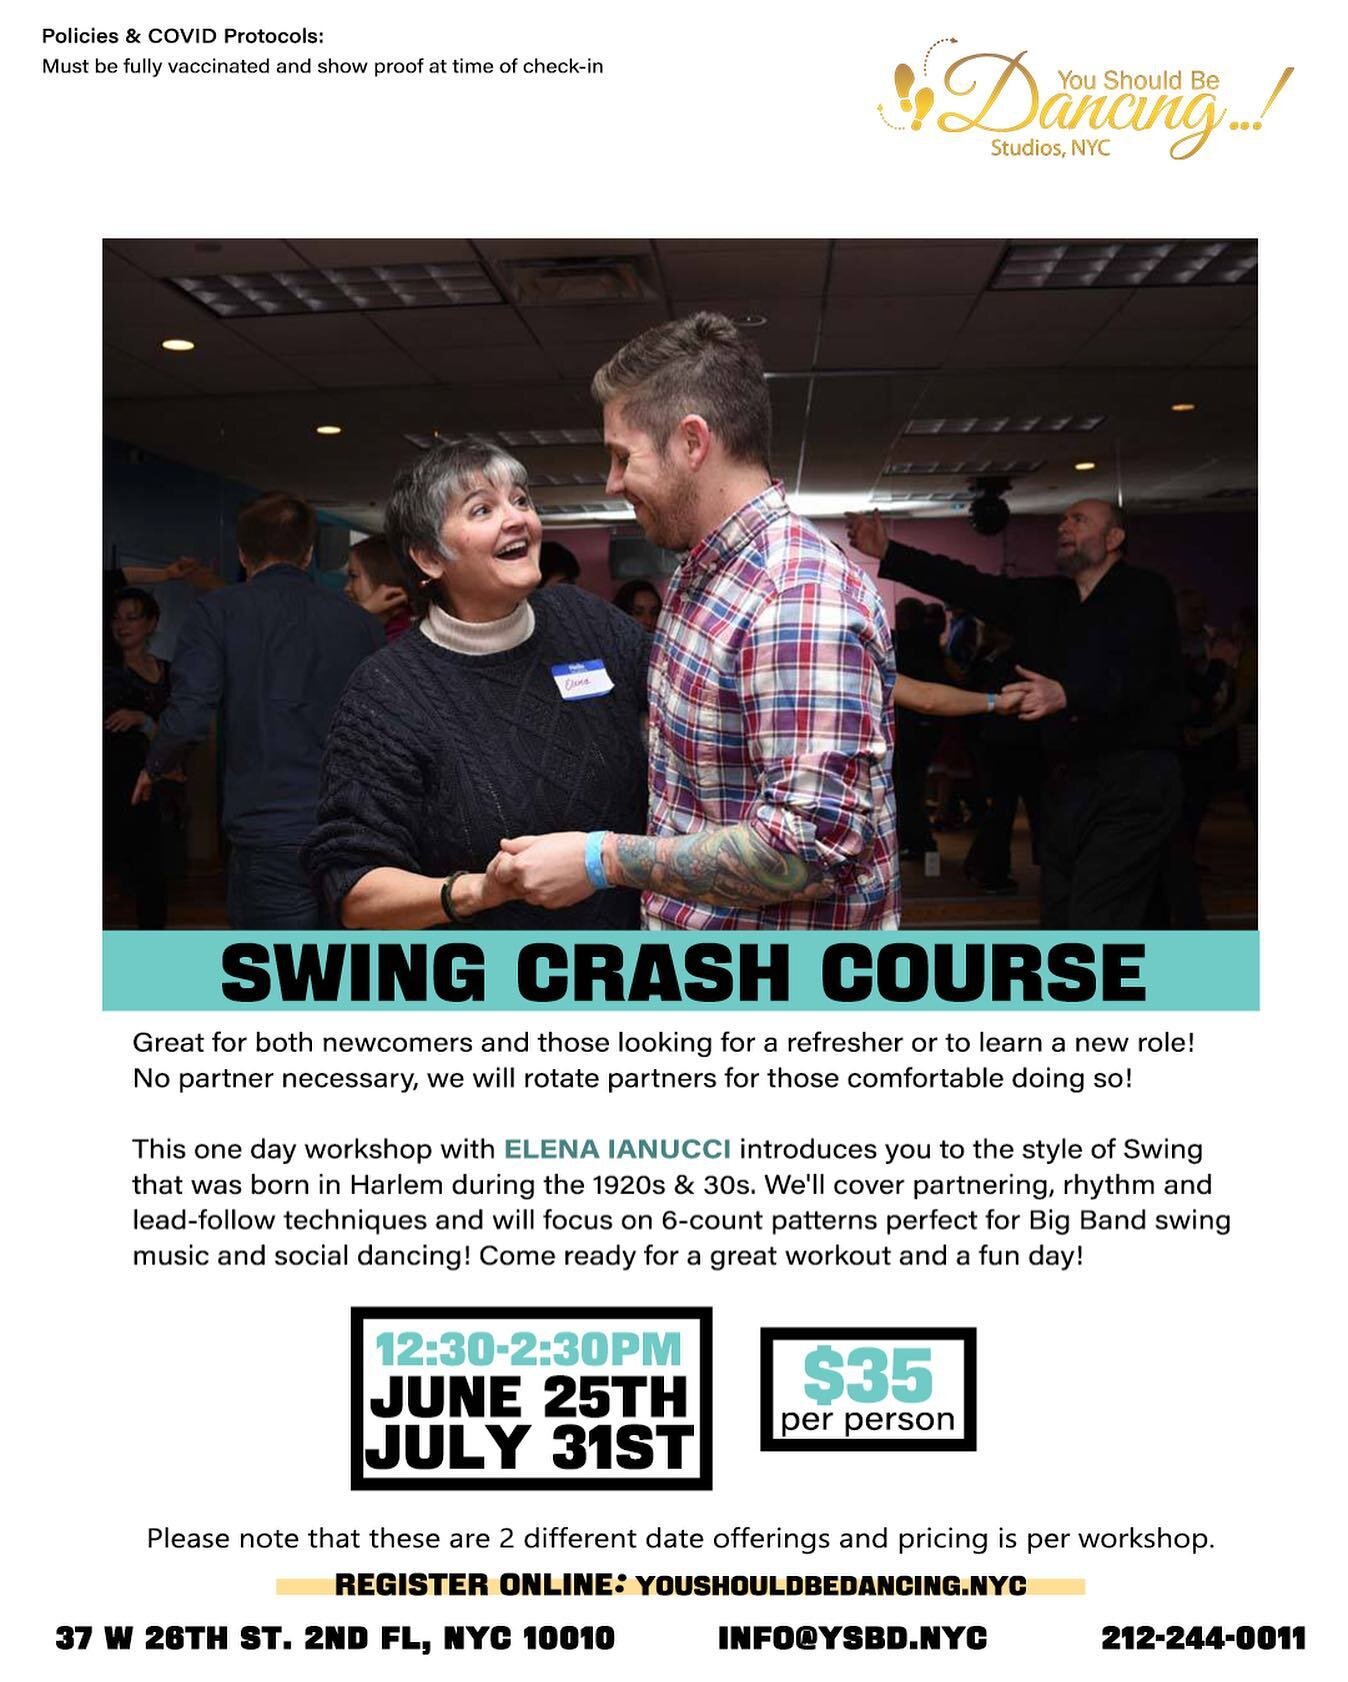 Join Elena Iannucci this Saturday at YSBD..! Learn how to swing dance with us this month, and hit the dance floor in no time. Register now. 
#swing #swingclass #learnswing #ysbd #youshouldbedancing